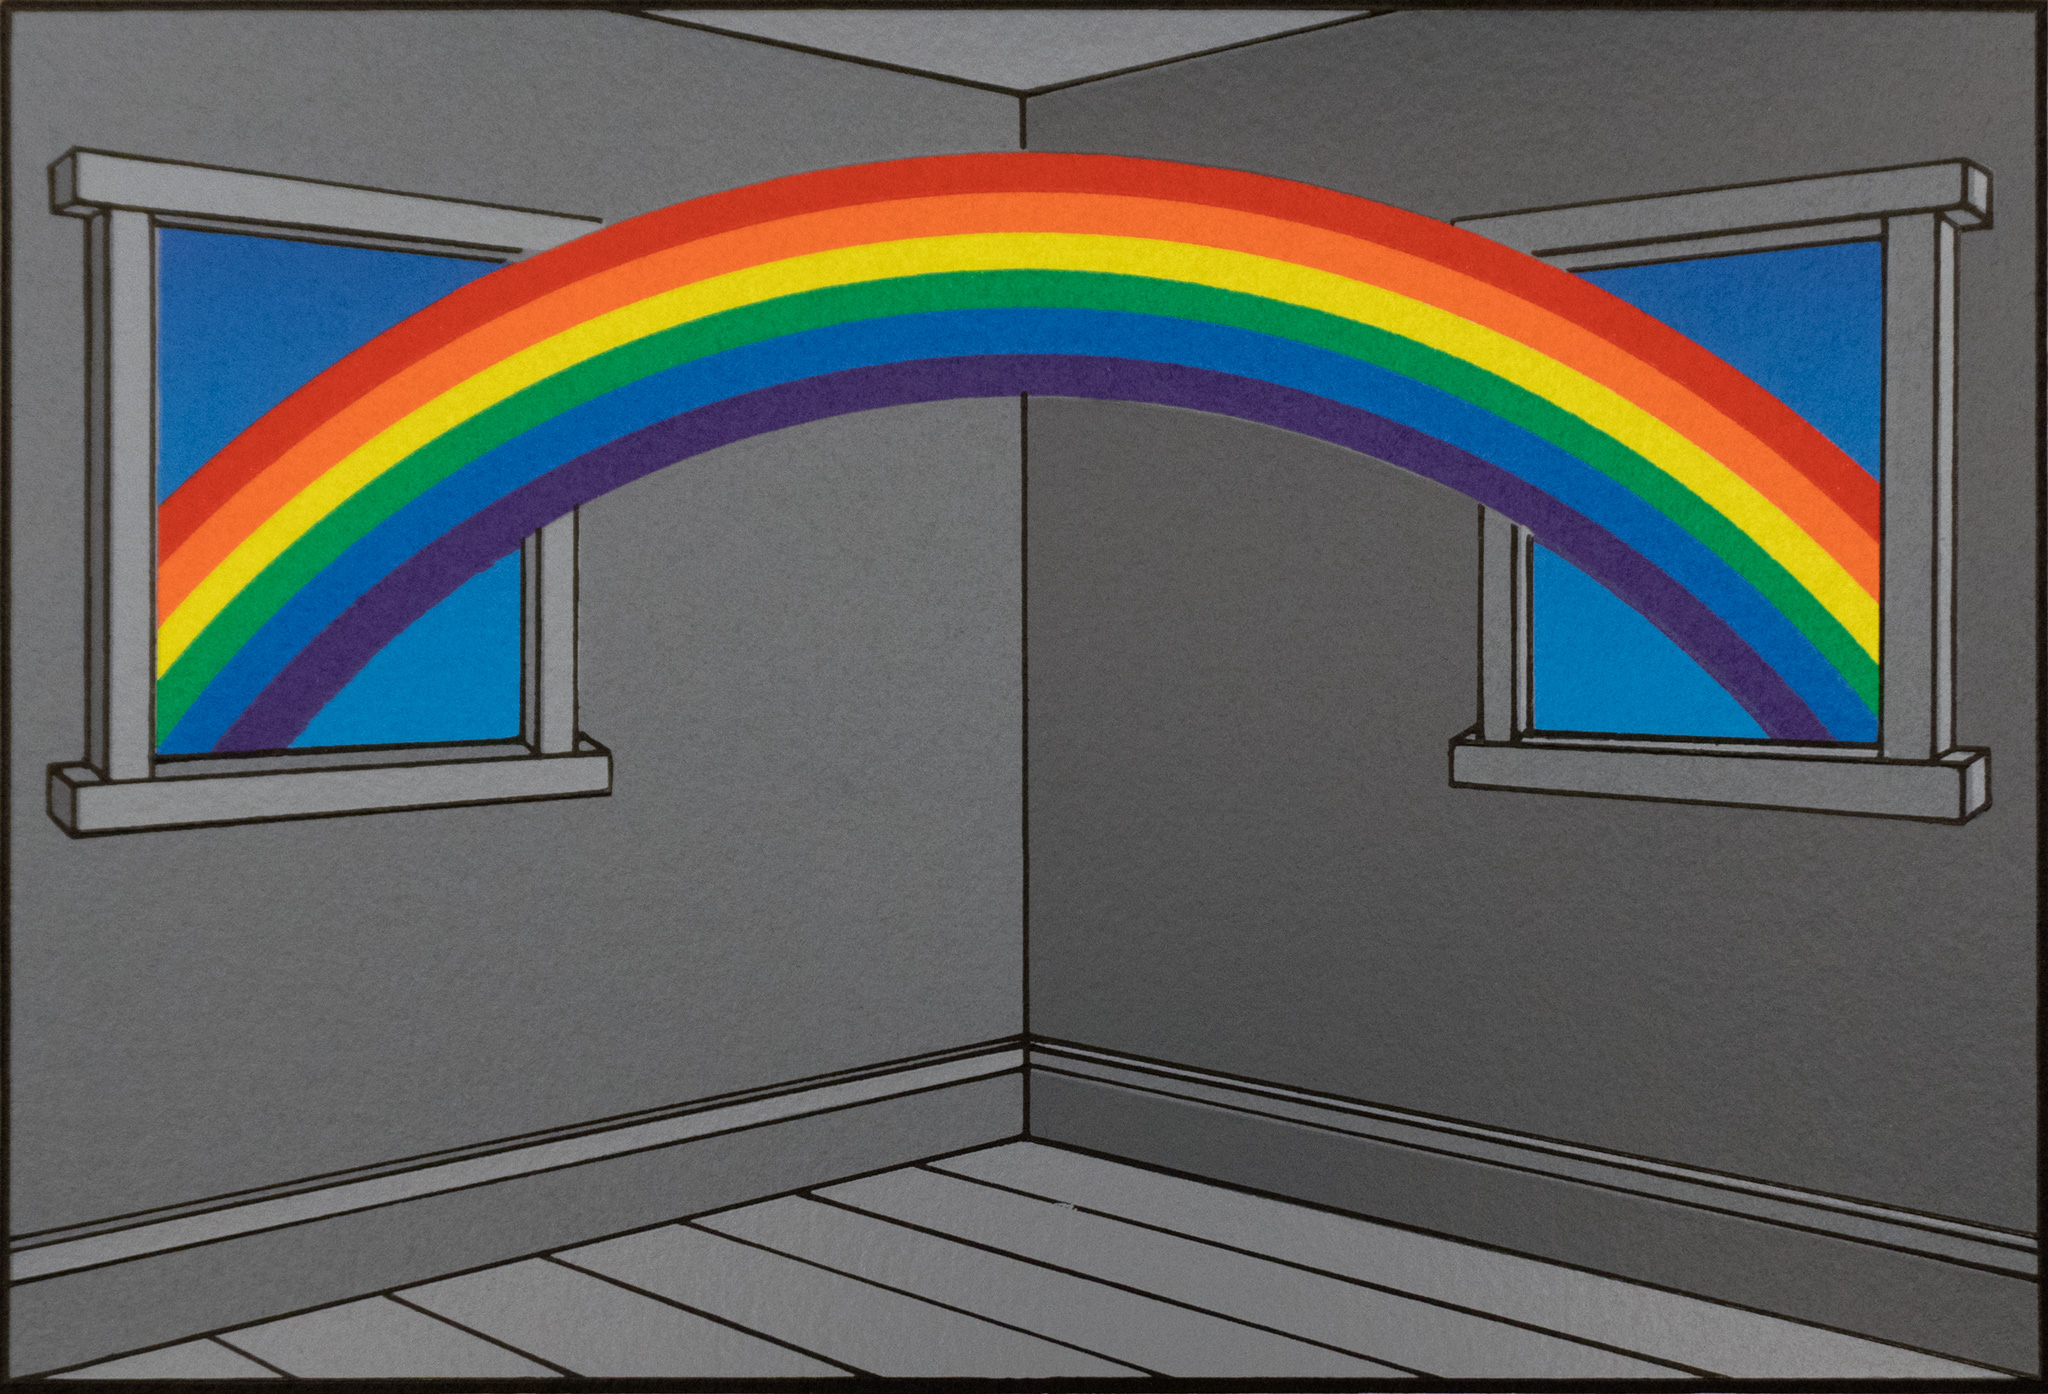 Hyde Cabinet #2: Rainbow Paradox - Tang Teaching Museum